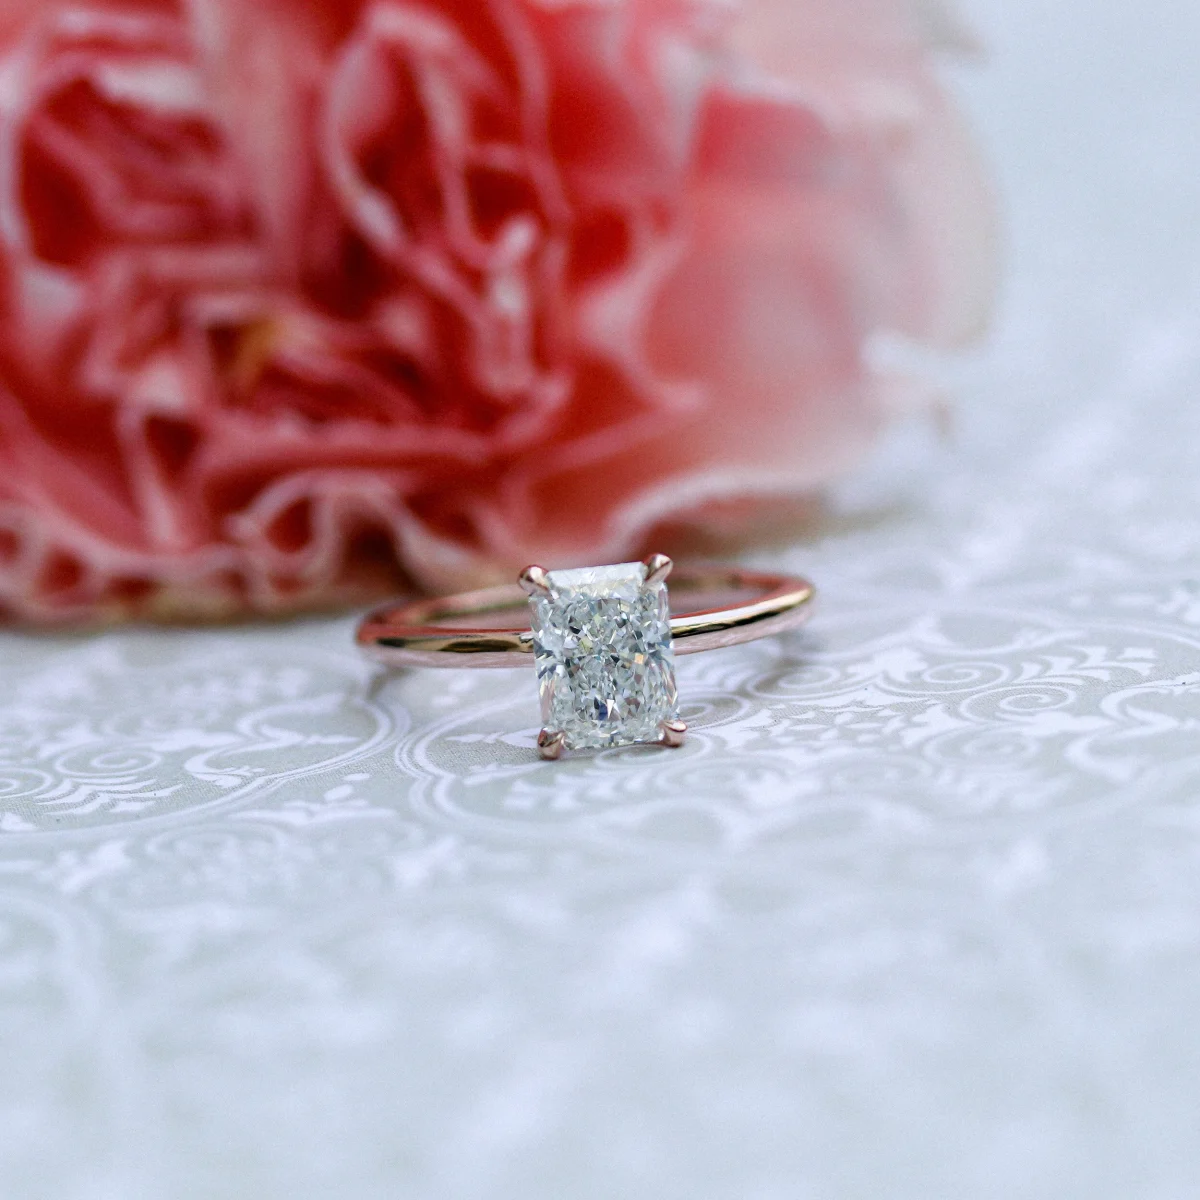 Radiant Classic Four Prong Solitaire Diamond Engagement Ring